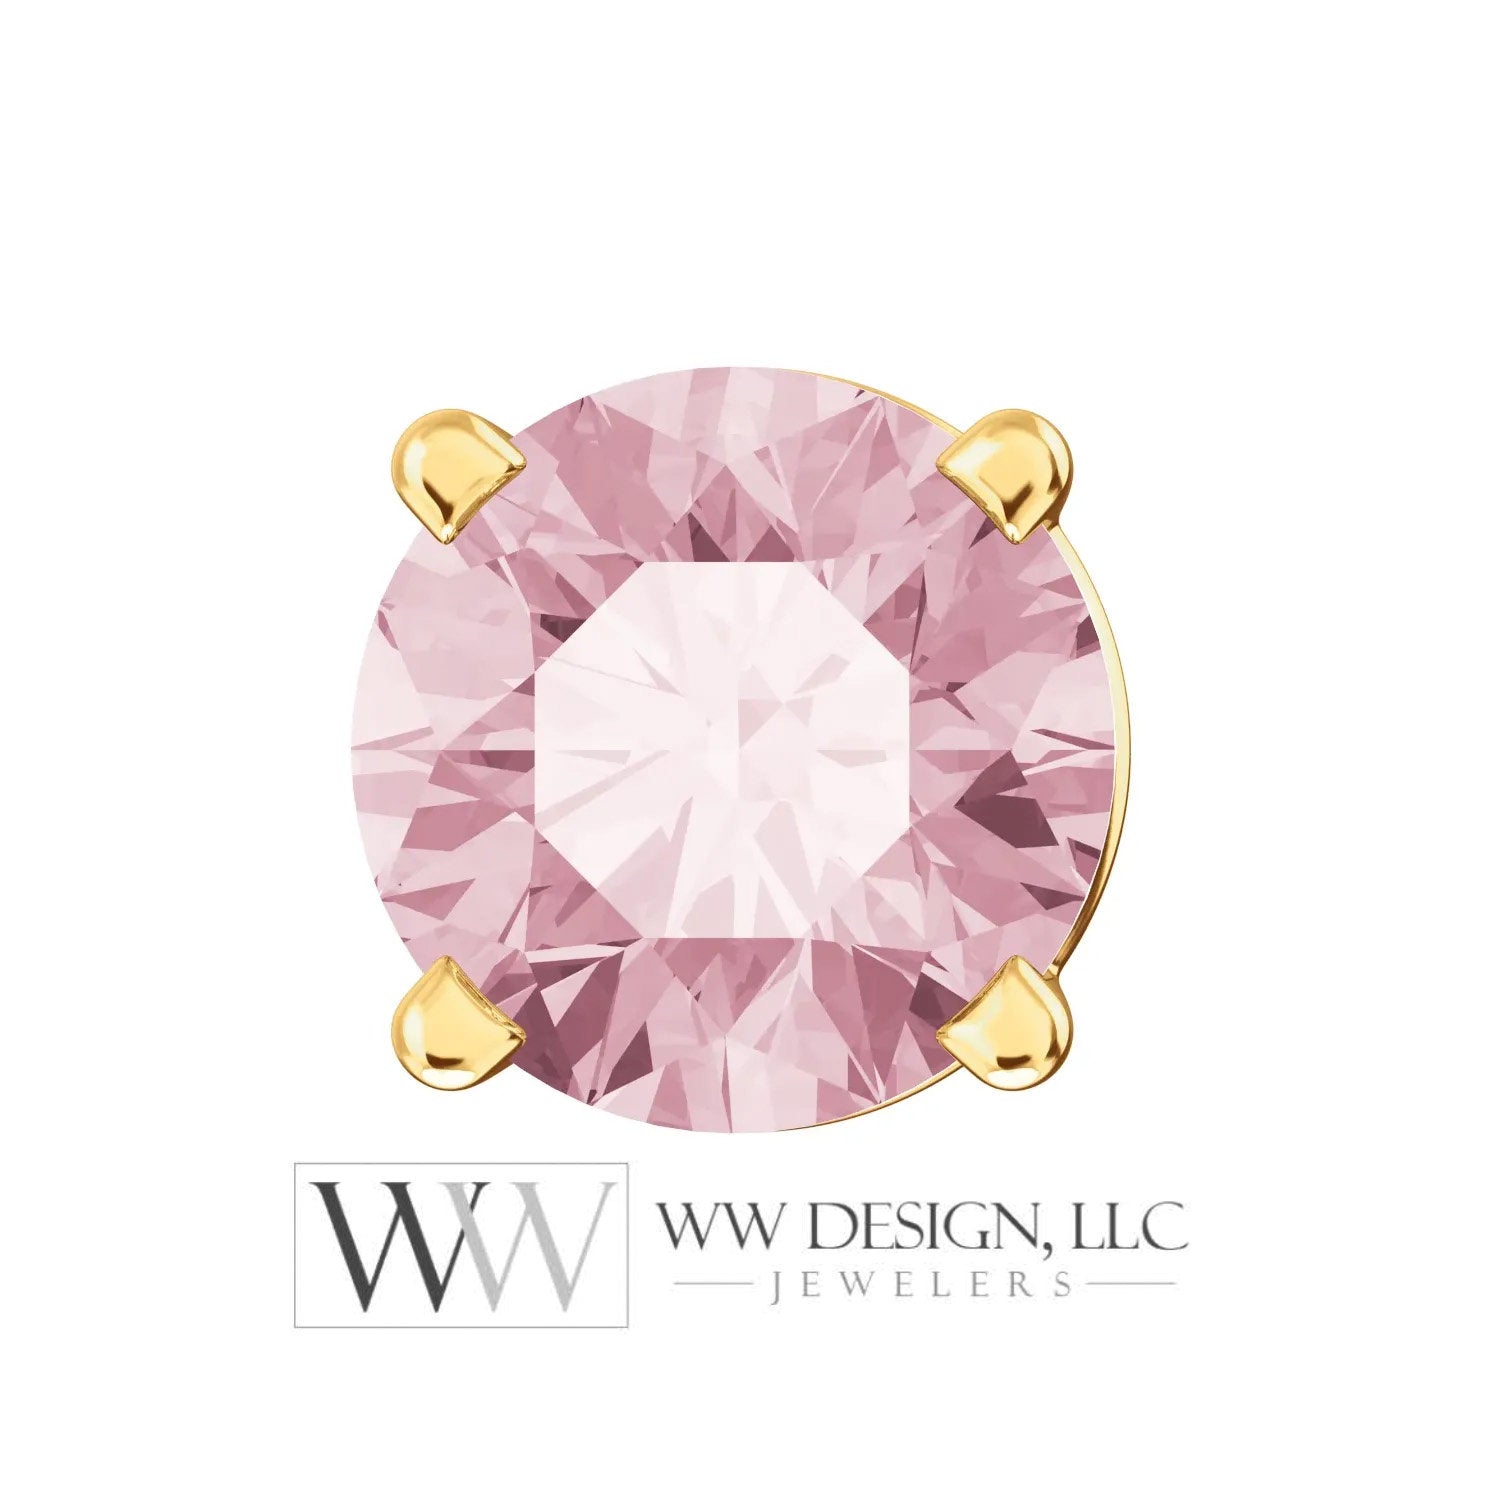 Genuine AA Pink Morganite Earring Studs 5mm 0.96 ctw (each 0.48cts) Post w/ 14k Solid Gold (Yellow, Rose, White)Silver, Platinum Studs